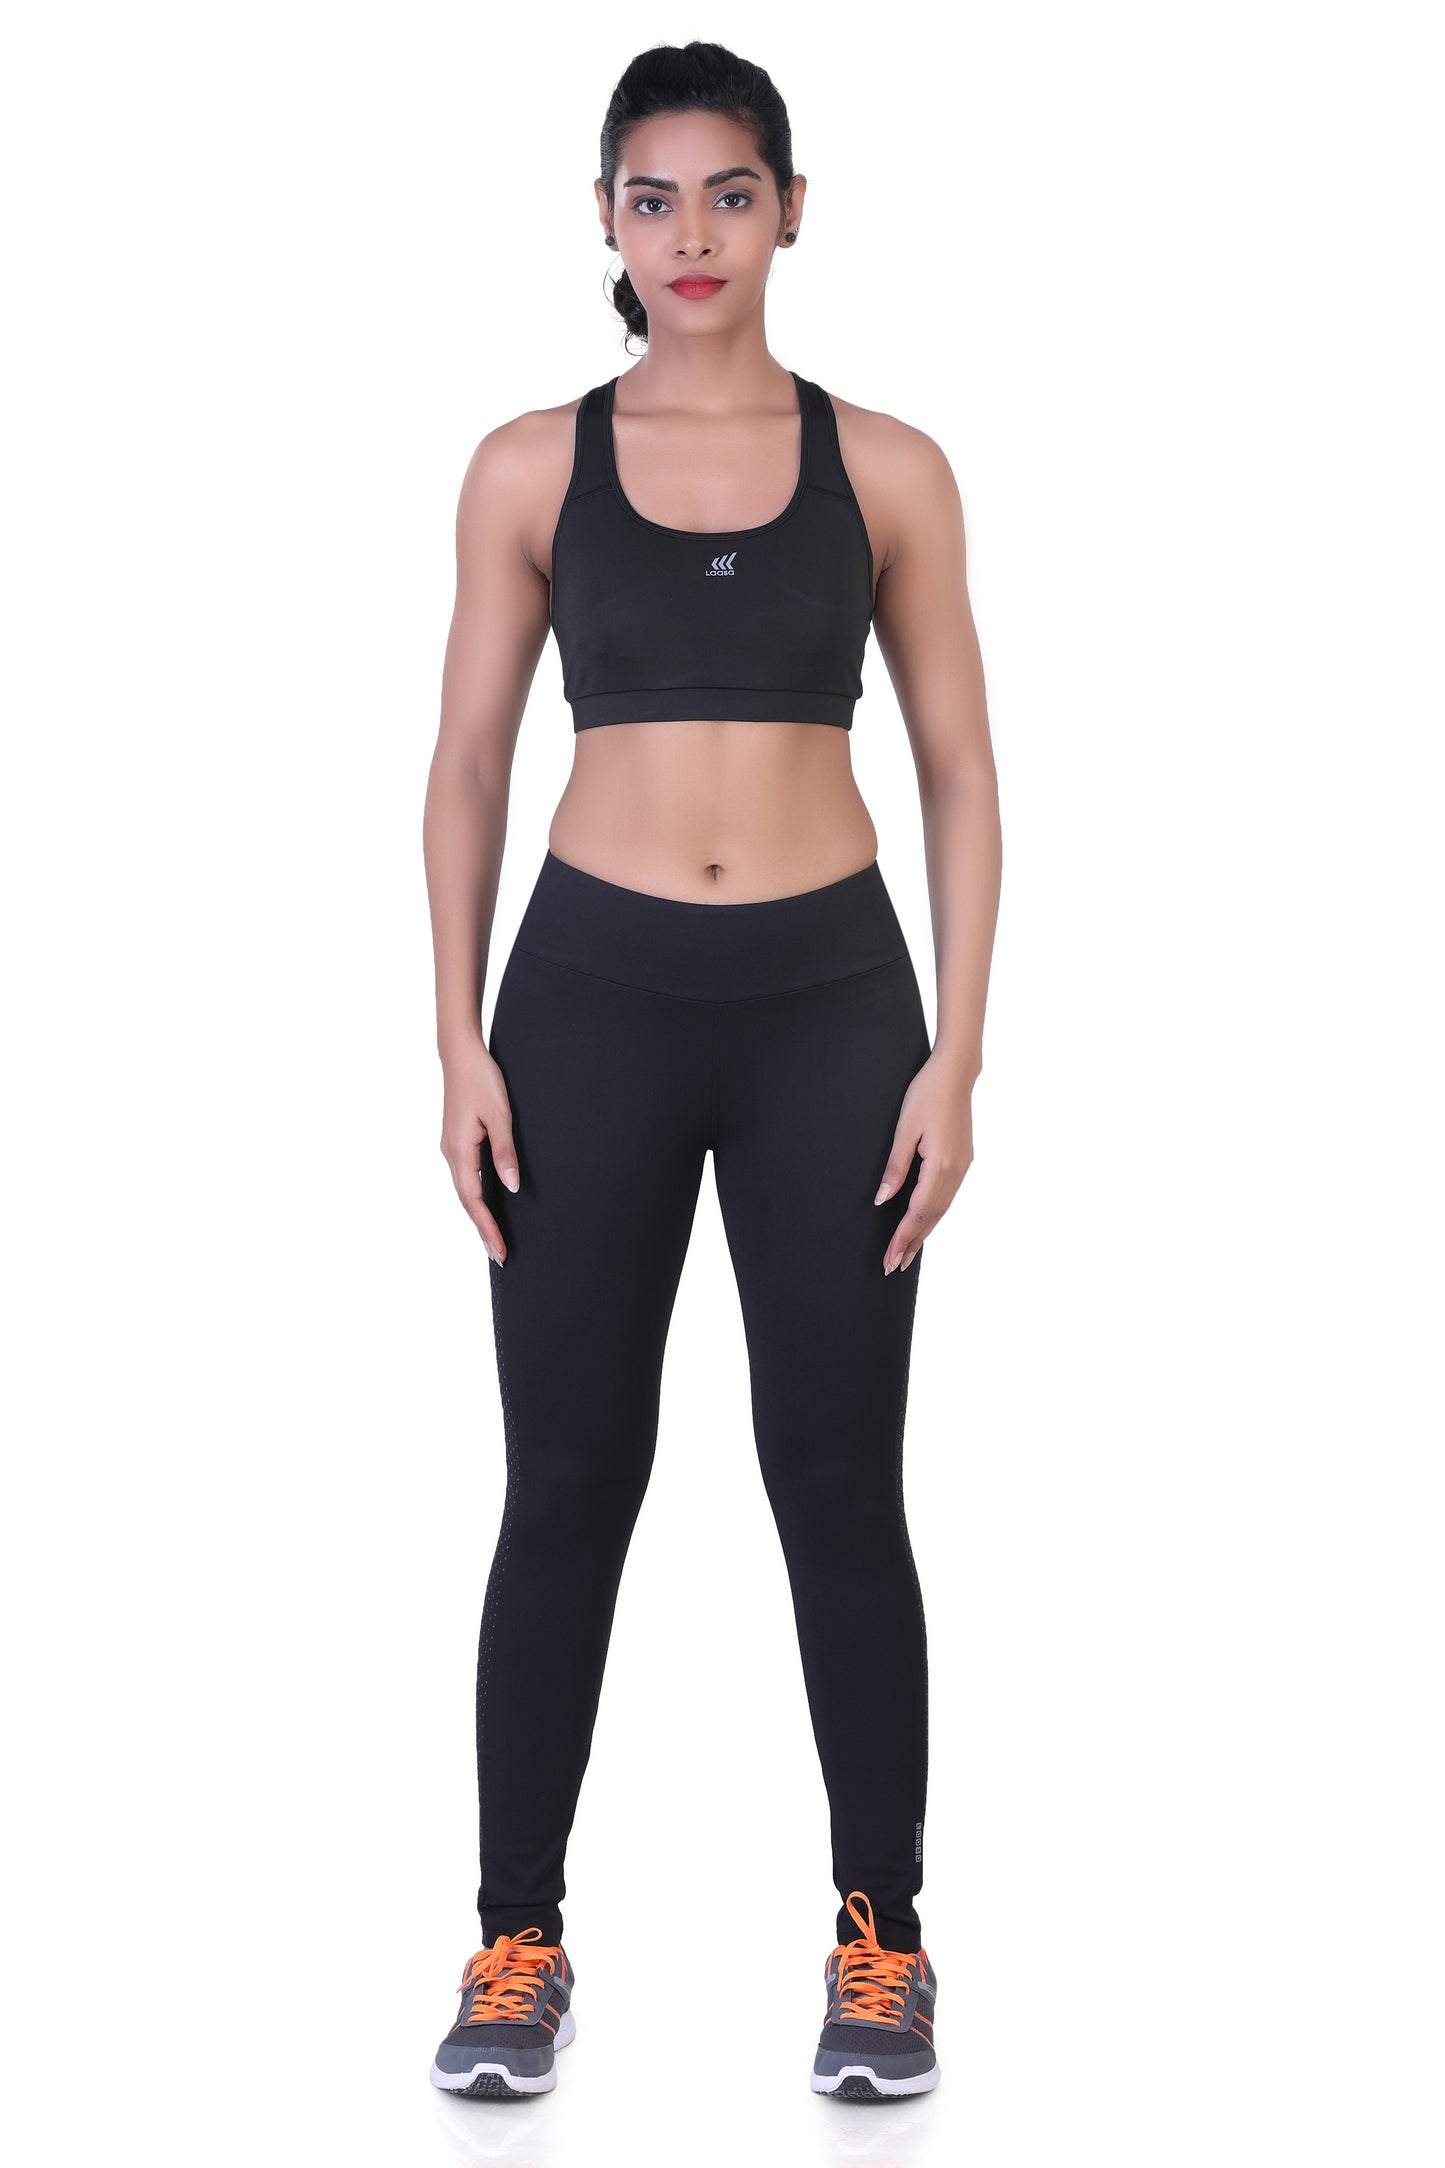 Buy Women's Leggings with Pockets - Non See Through Yoga Pants Buttery Soft High  Waist Tummy Control Workout Athletic Tights, Black, Small-Medium at